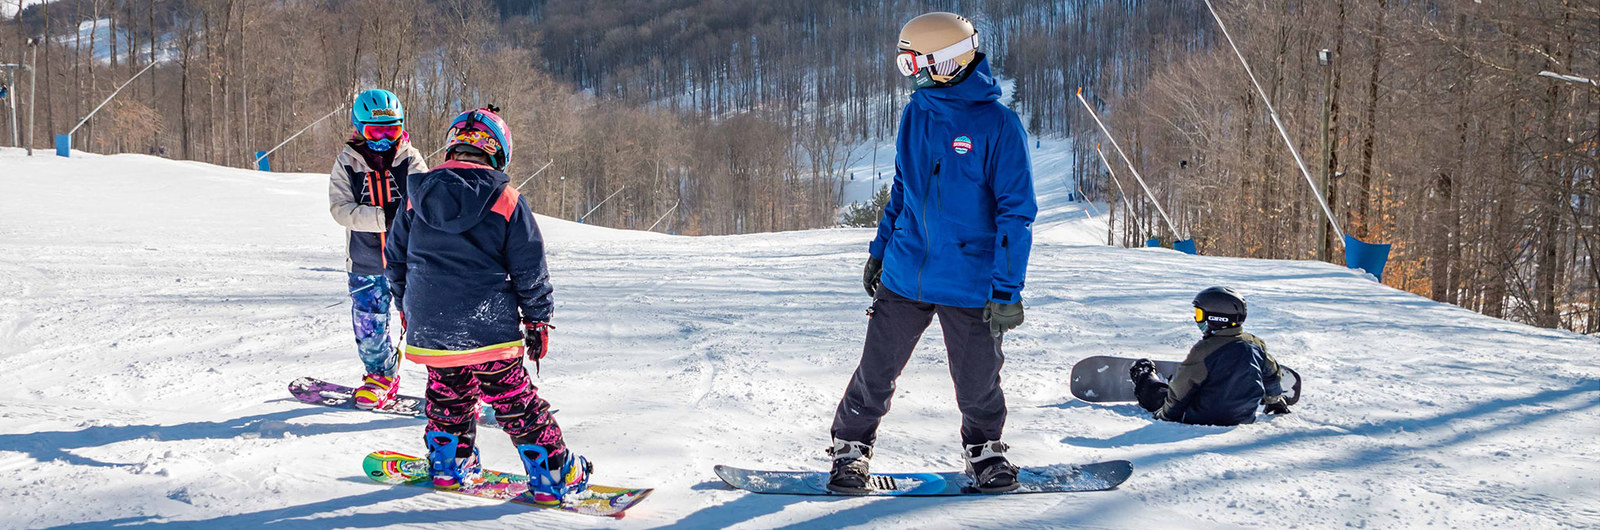 kids in a snowboard lesson